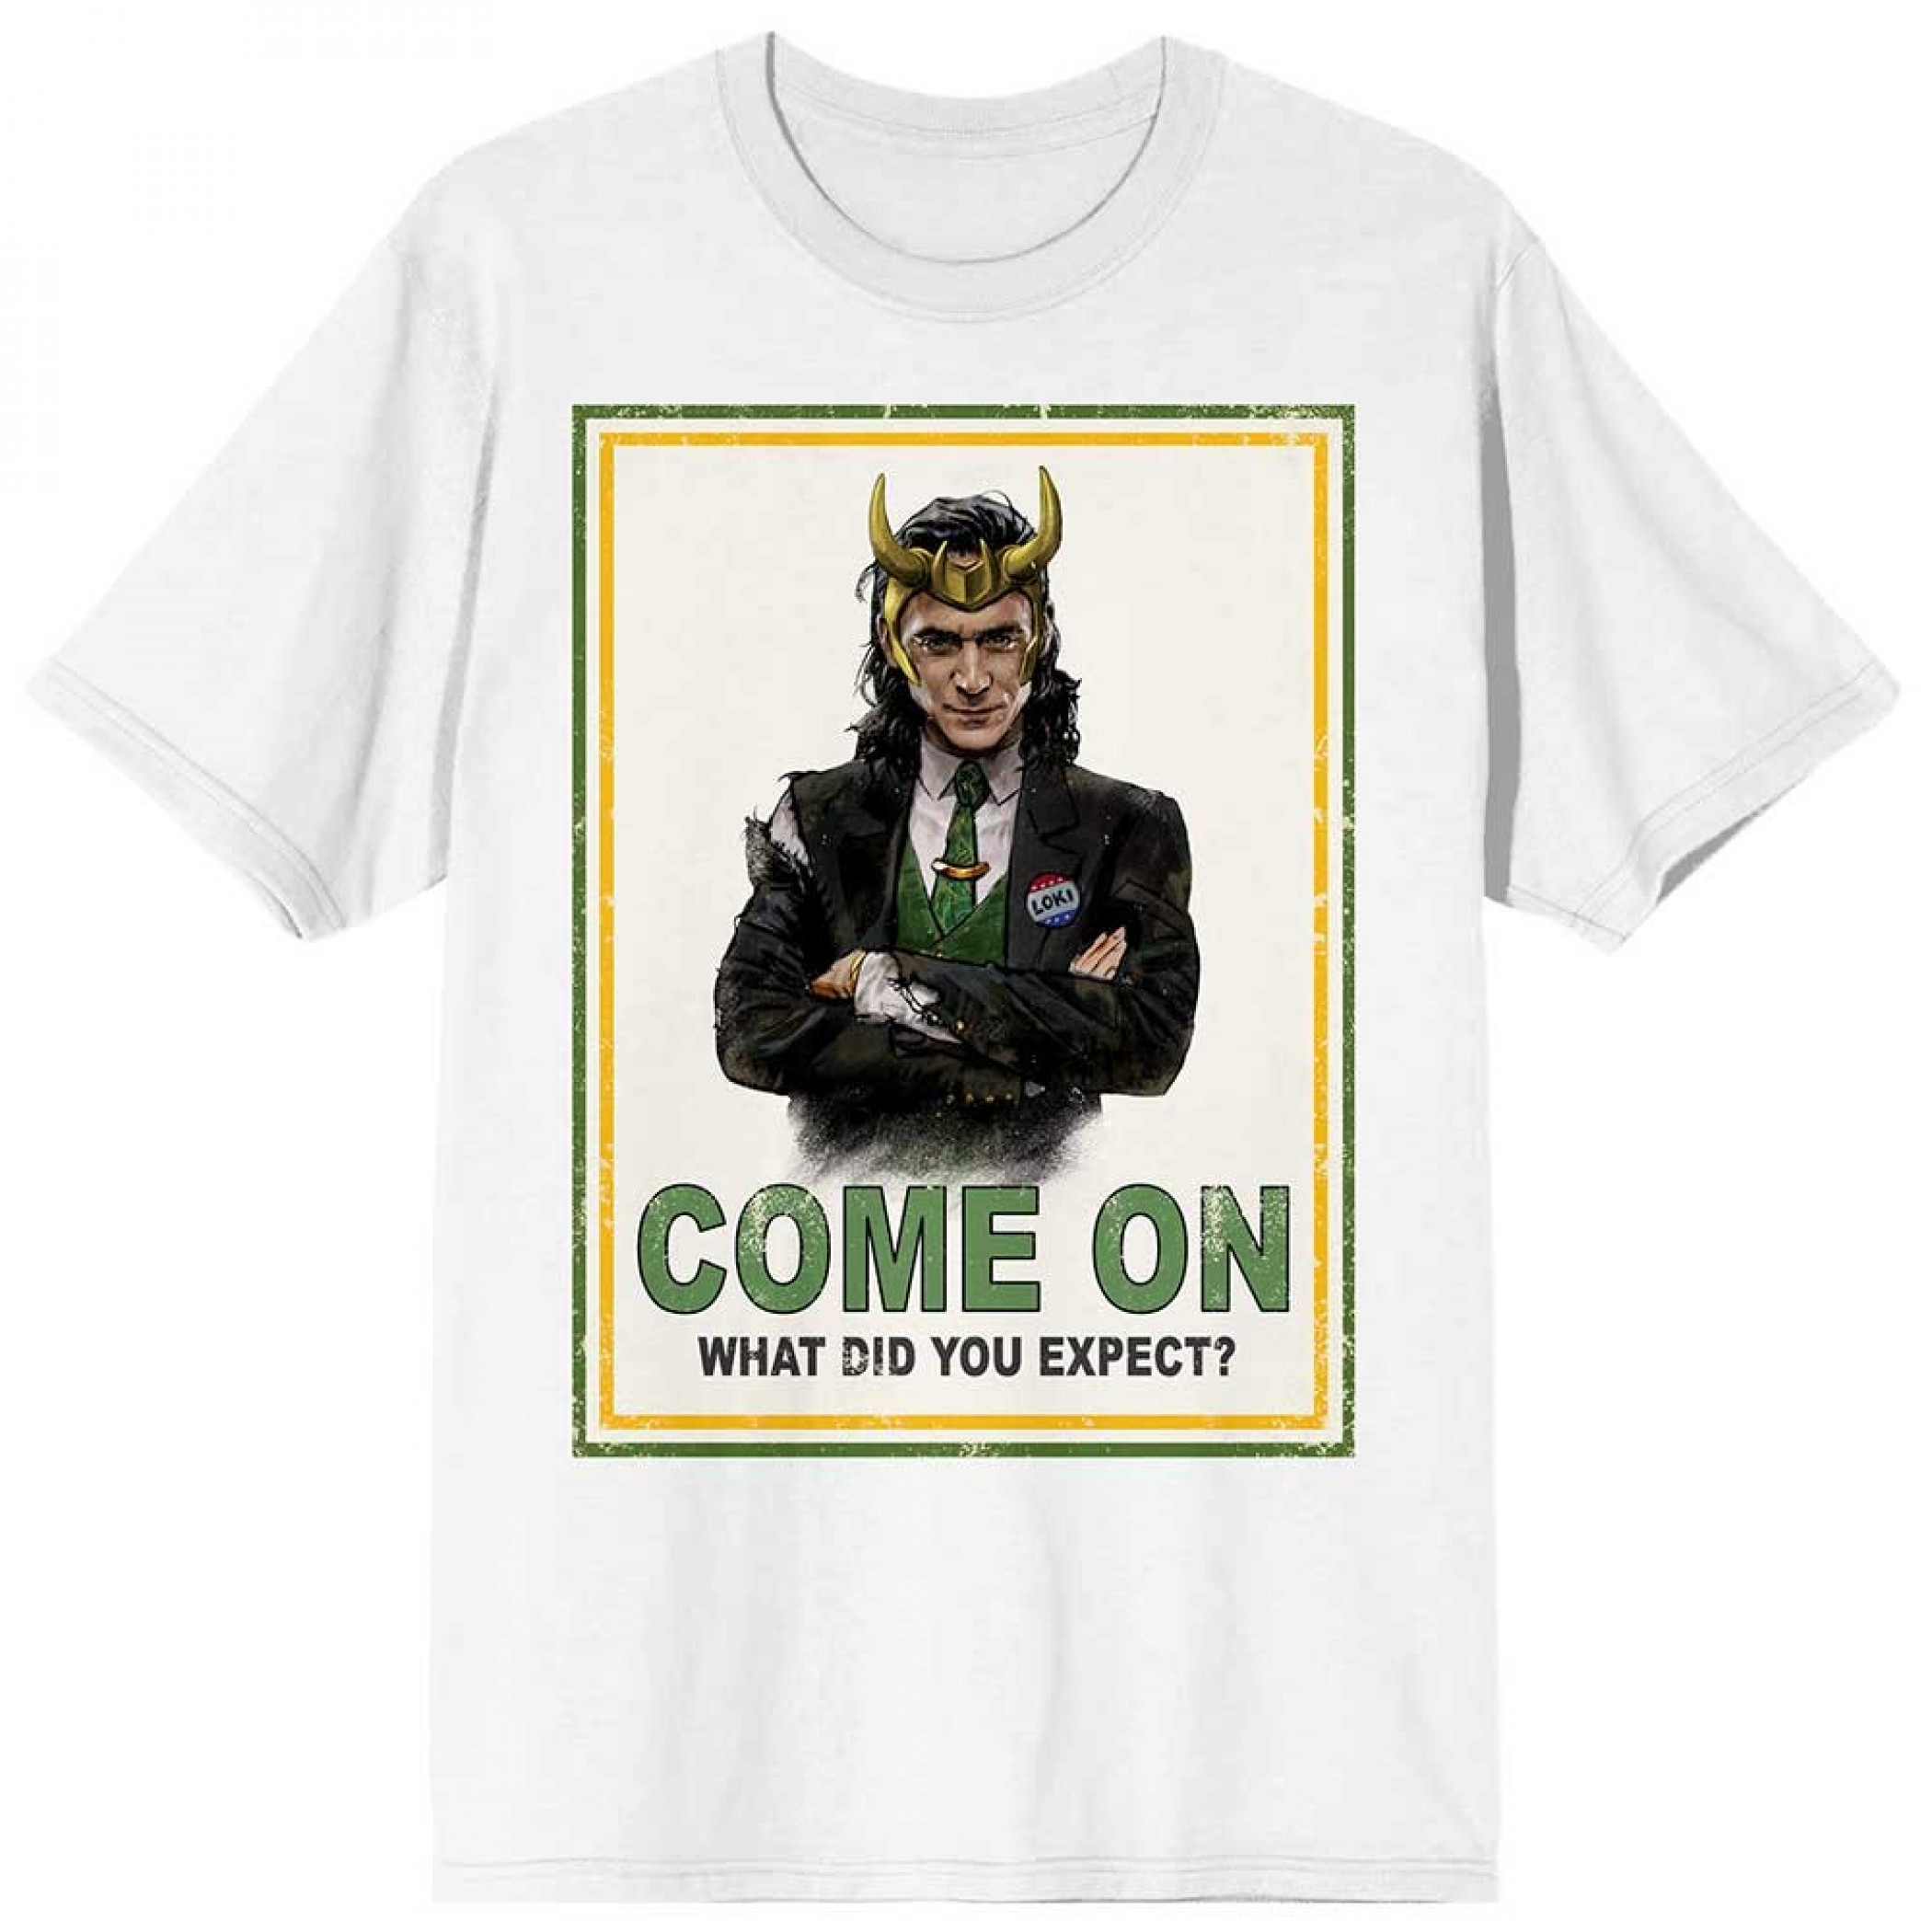 Marvel Studios Loki Series Come On What Did You Expect? T-Shirt